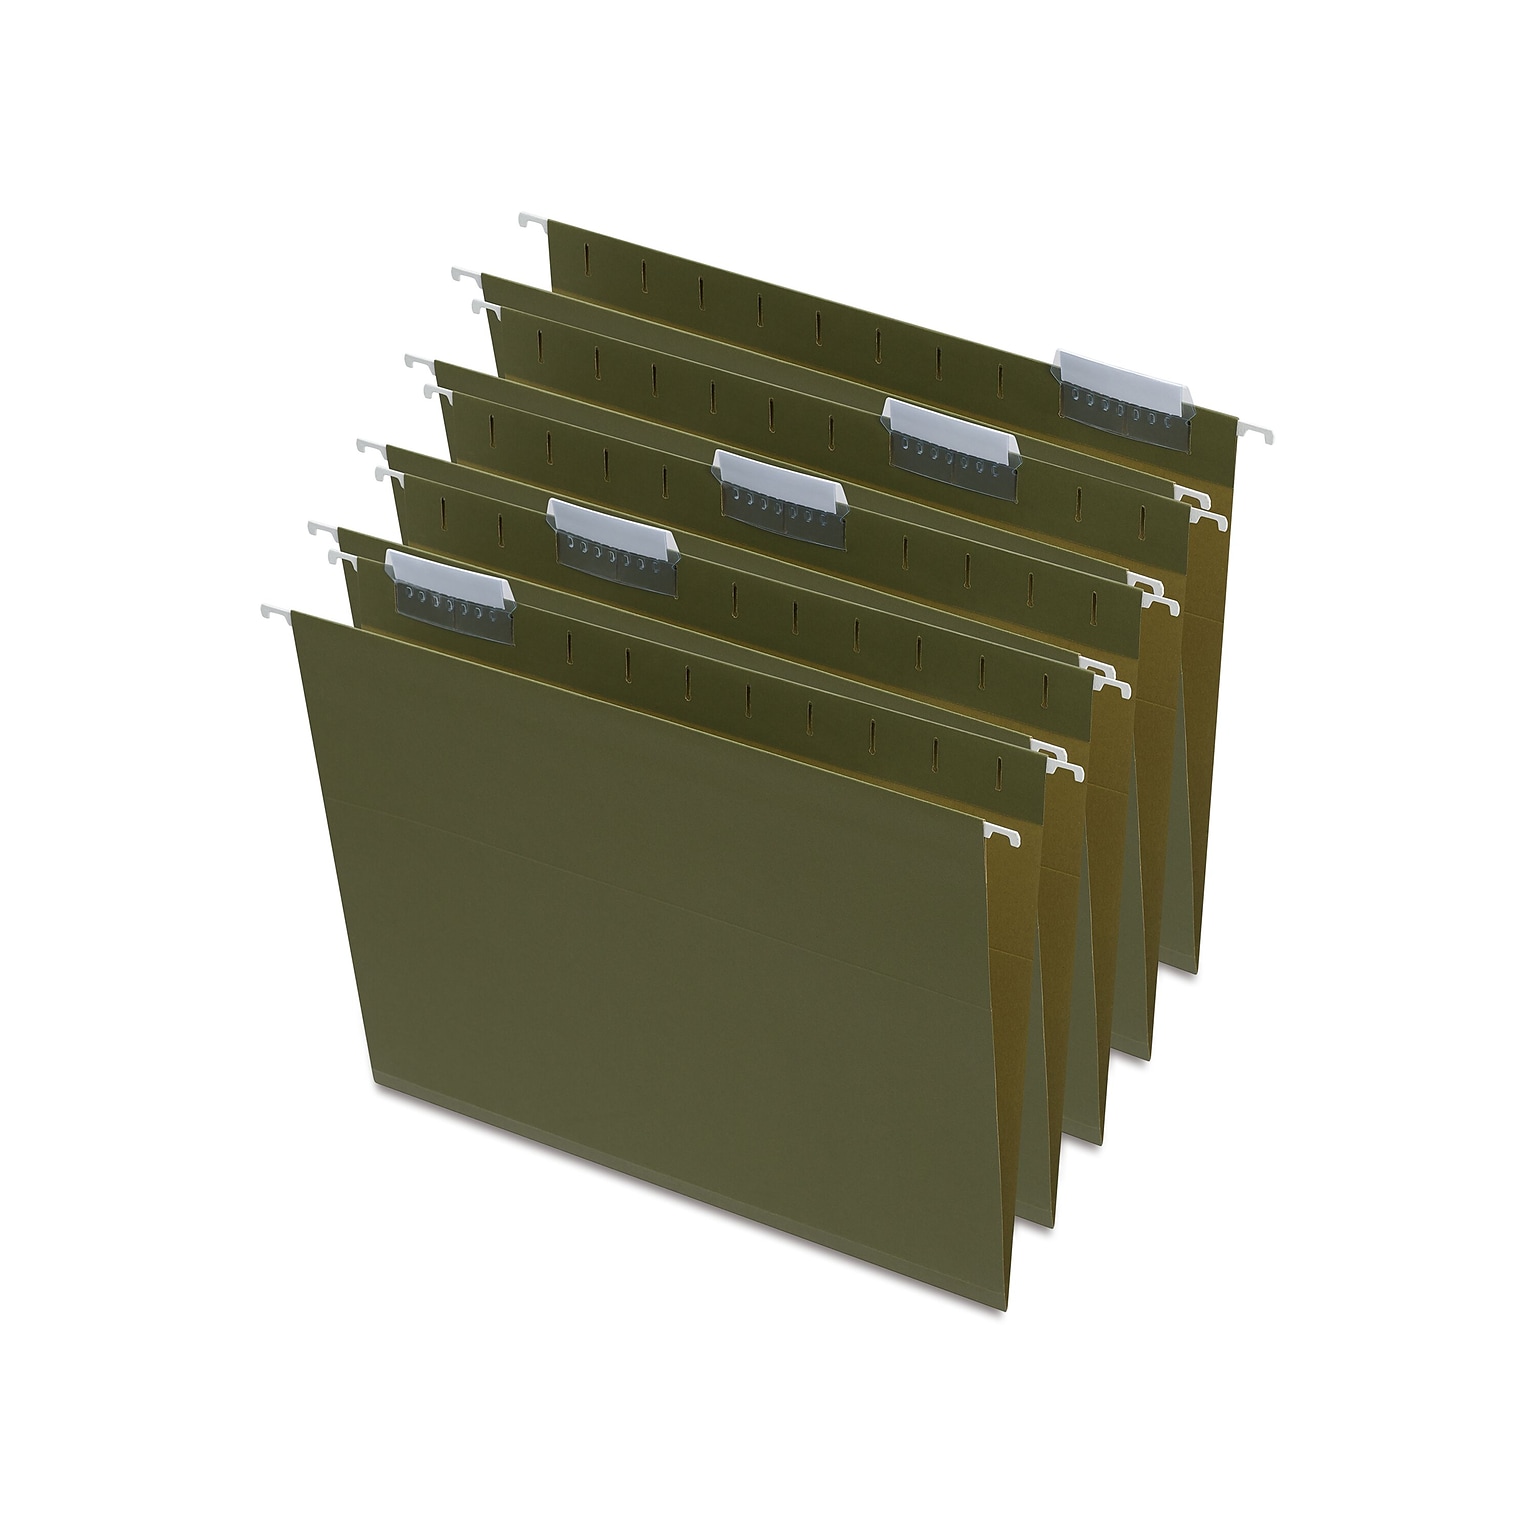 Quill Brand® Reinforced 5-Tab Box Bottom Hanging File Folders, 1 Expansion, Letter Size, Dark Green, 25/Box (730050)